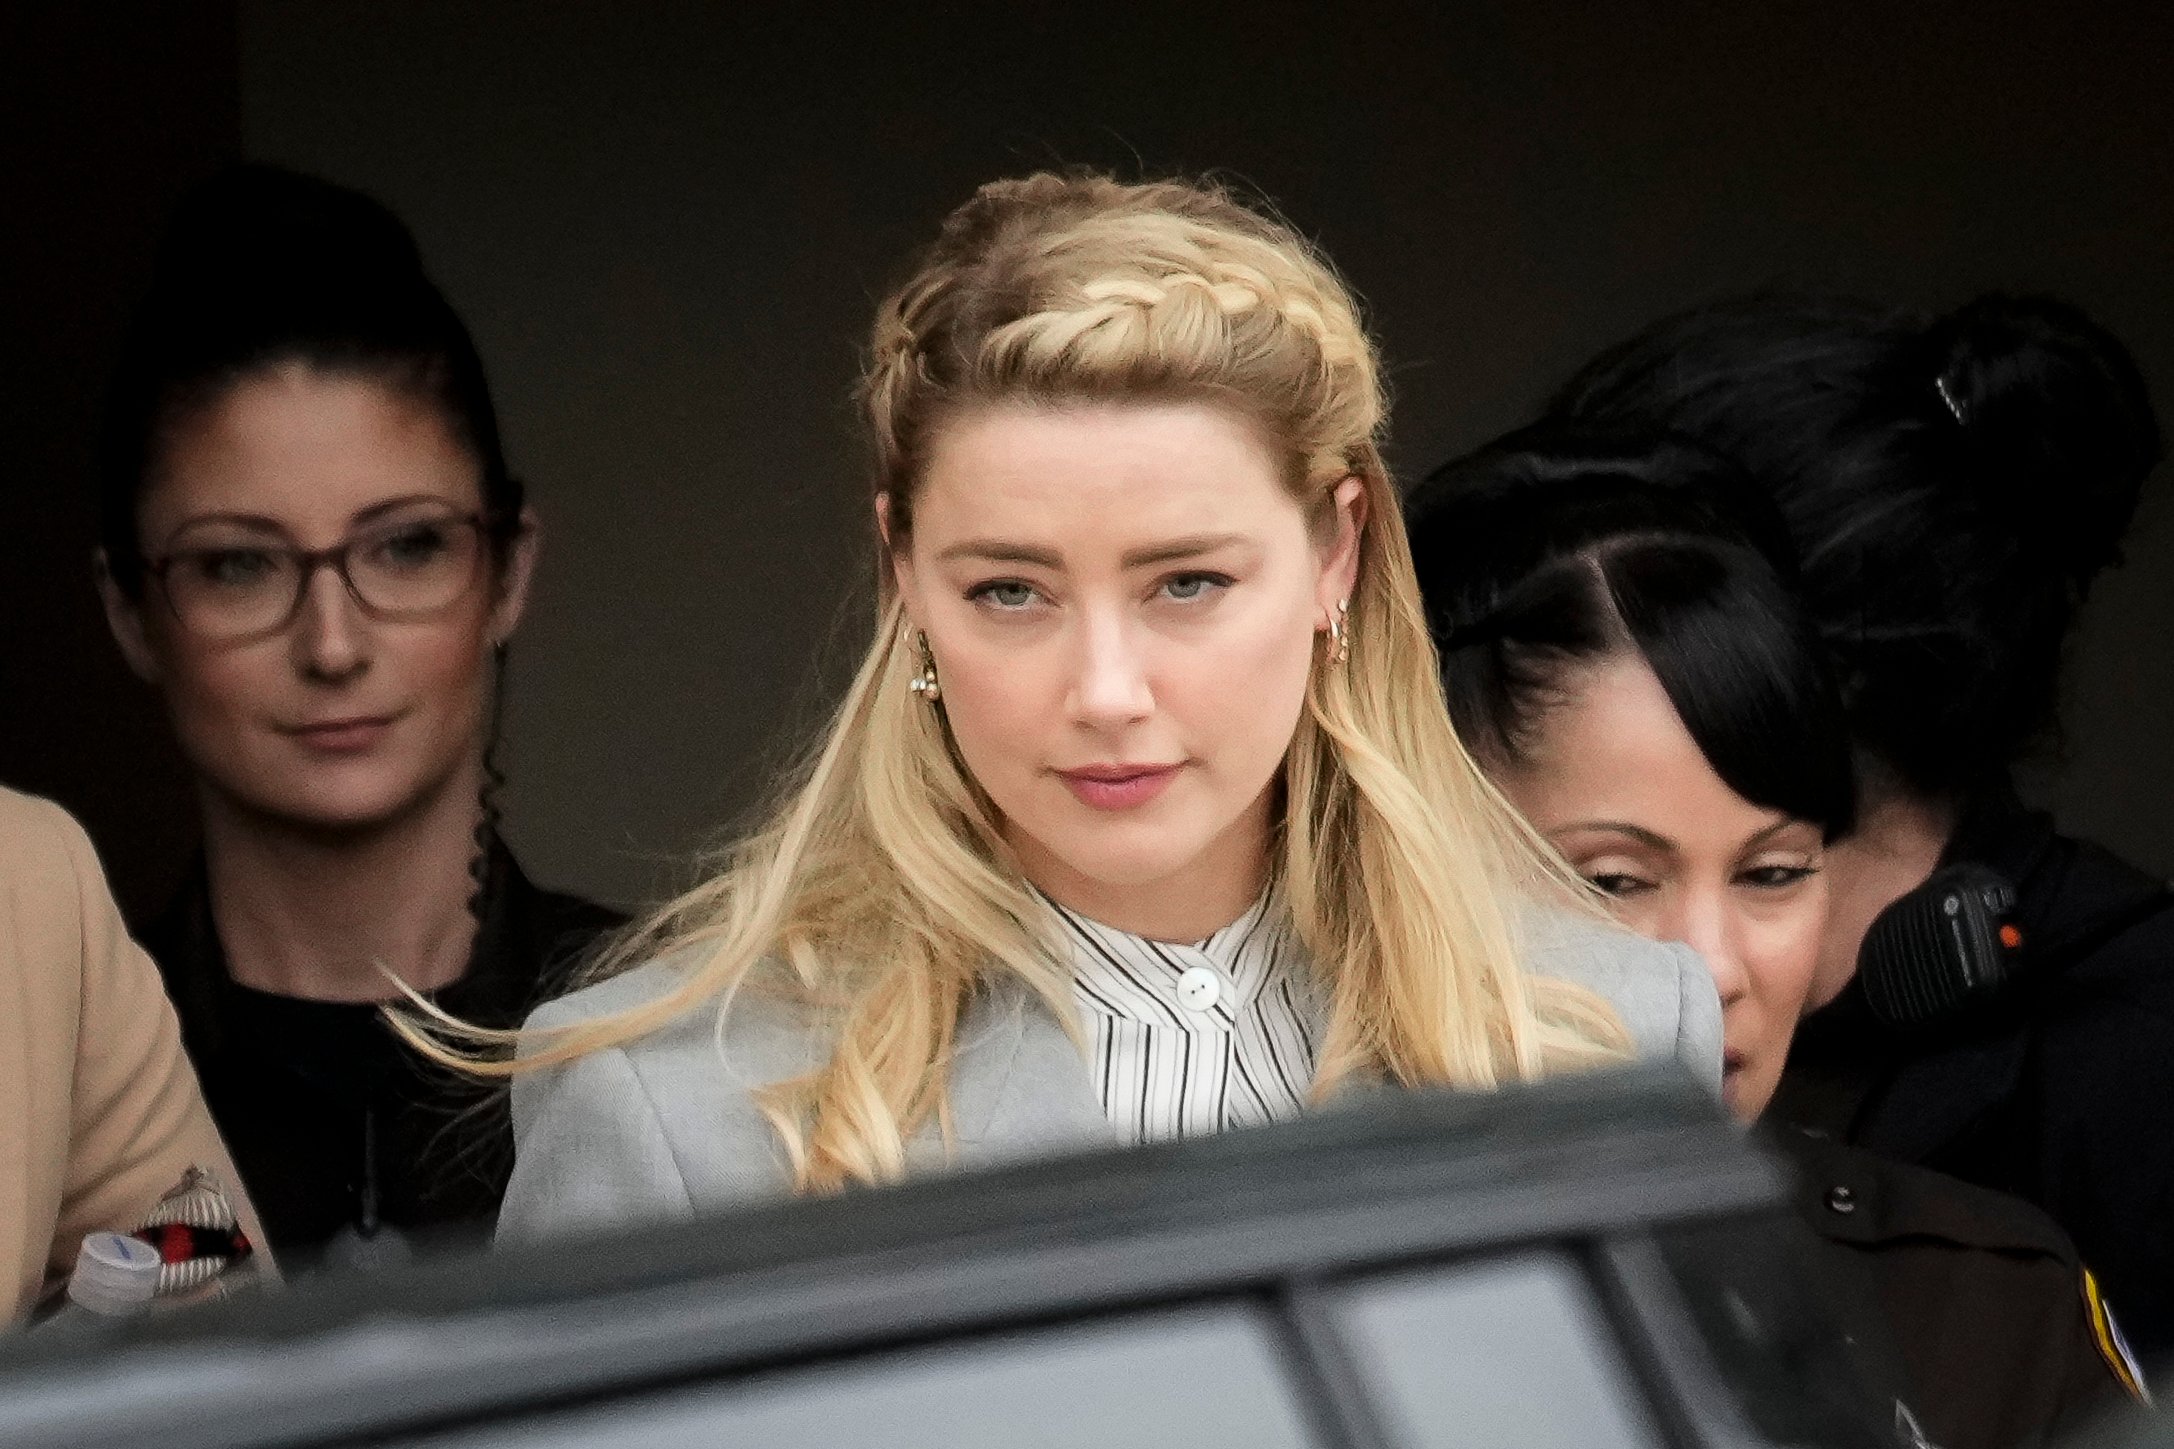 Amber Heard, seen here wearing a gray suit, issued a statement regarding the verdict of her trial against ex-husband Johnny Depp.